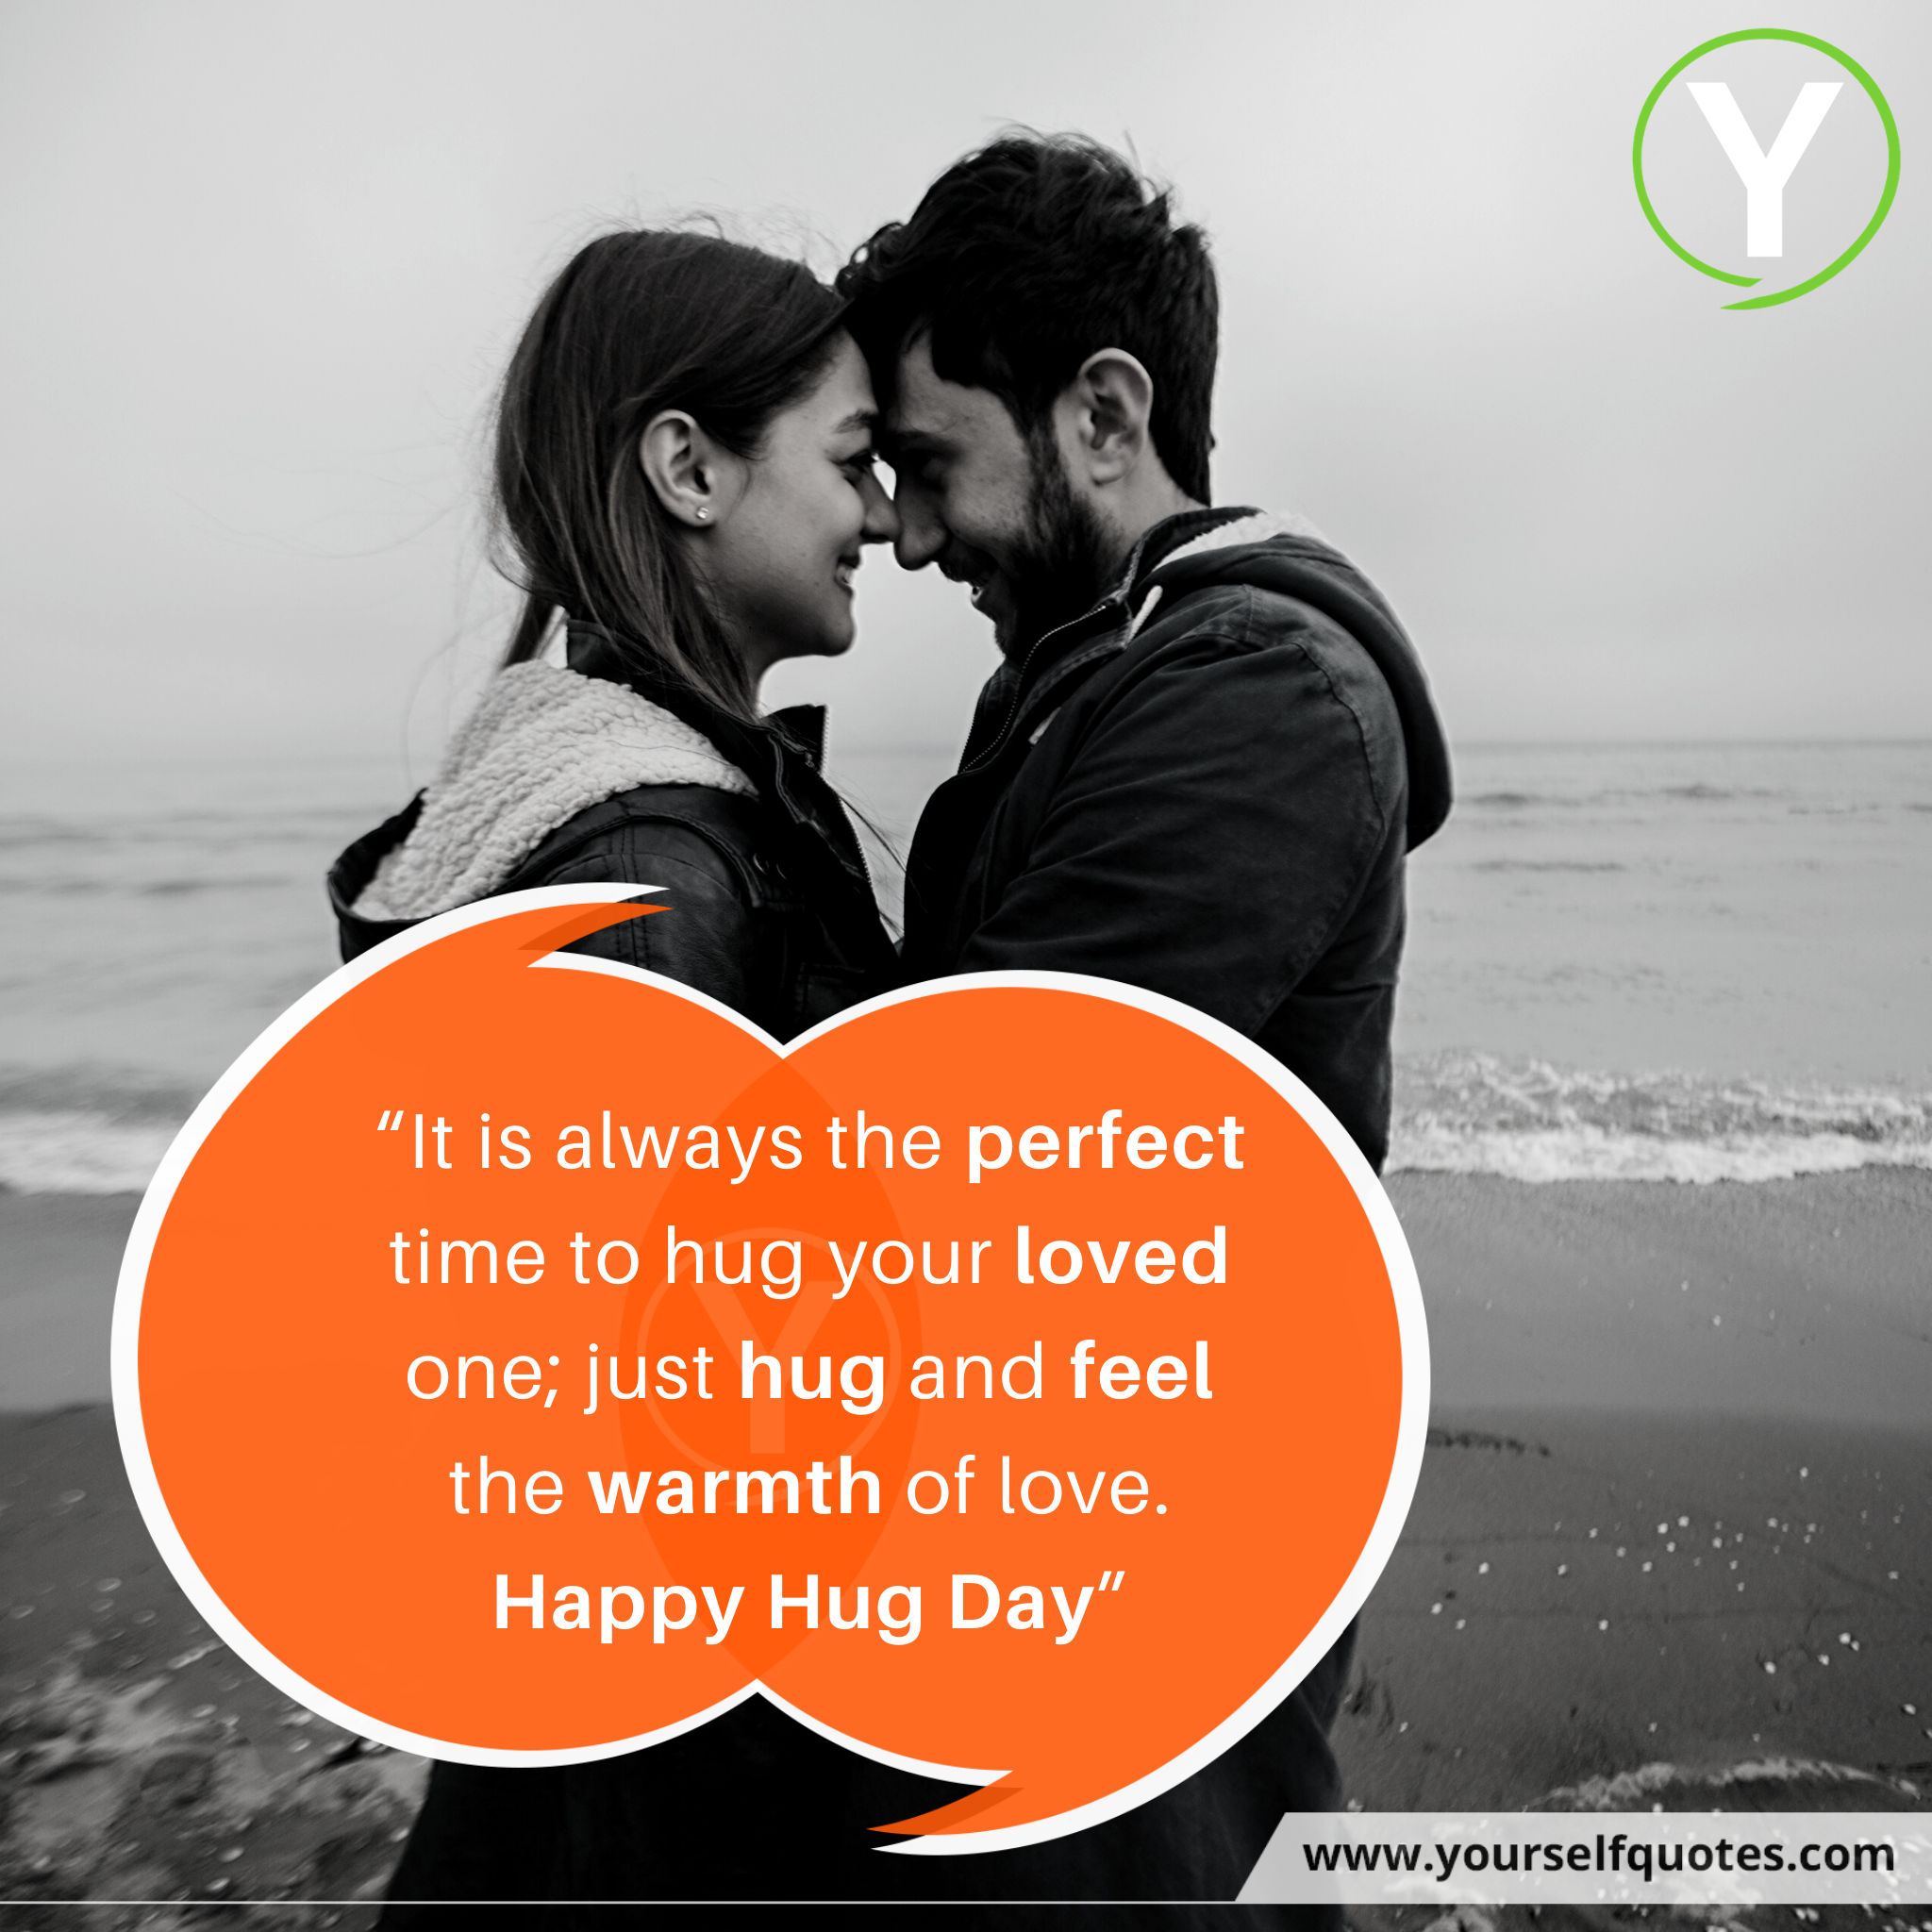 Happy Hug Day Quotes Images